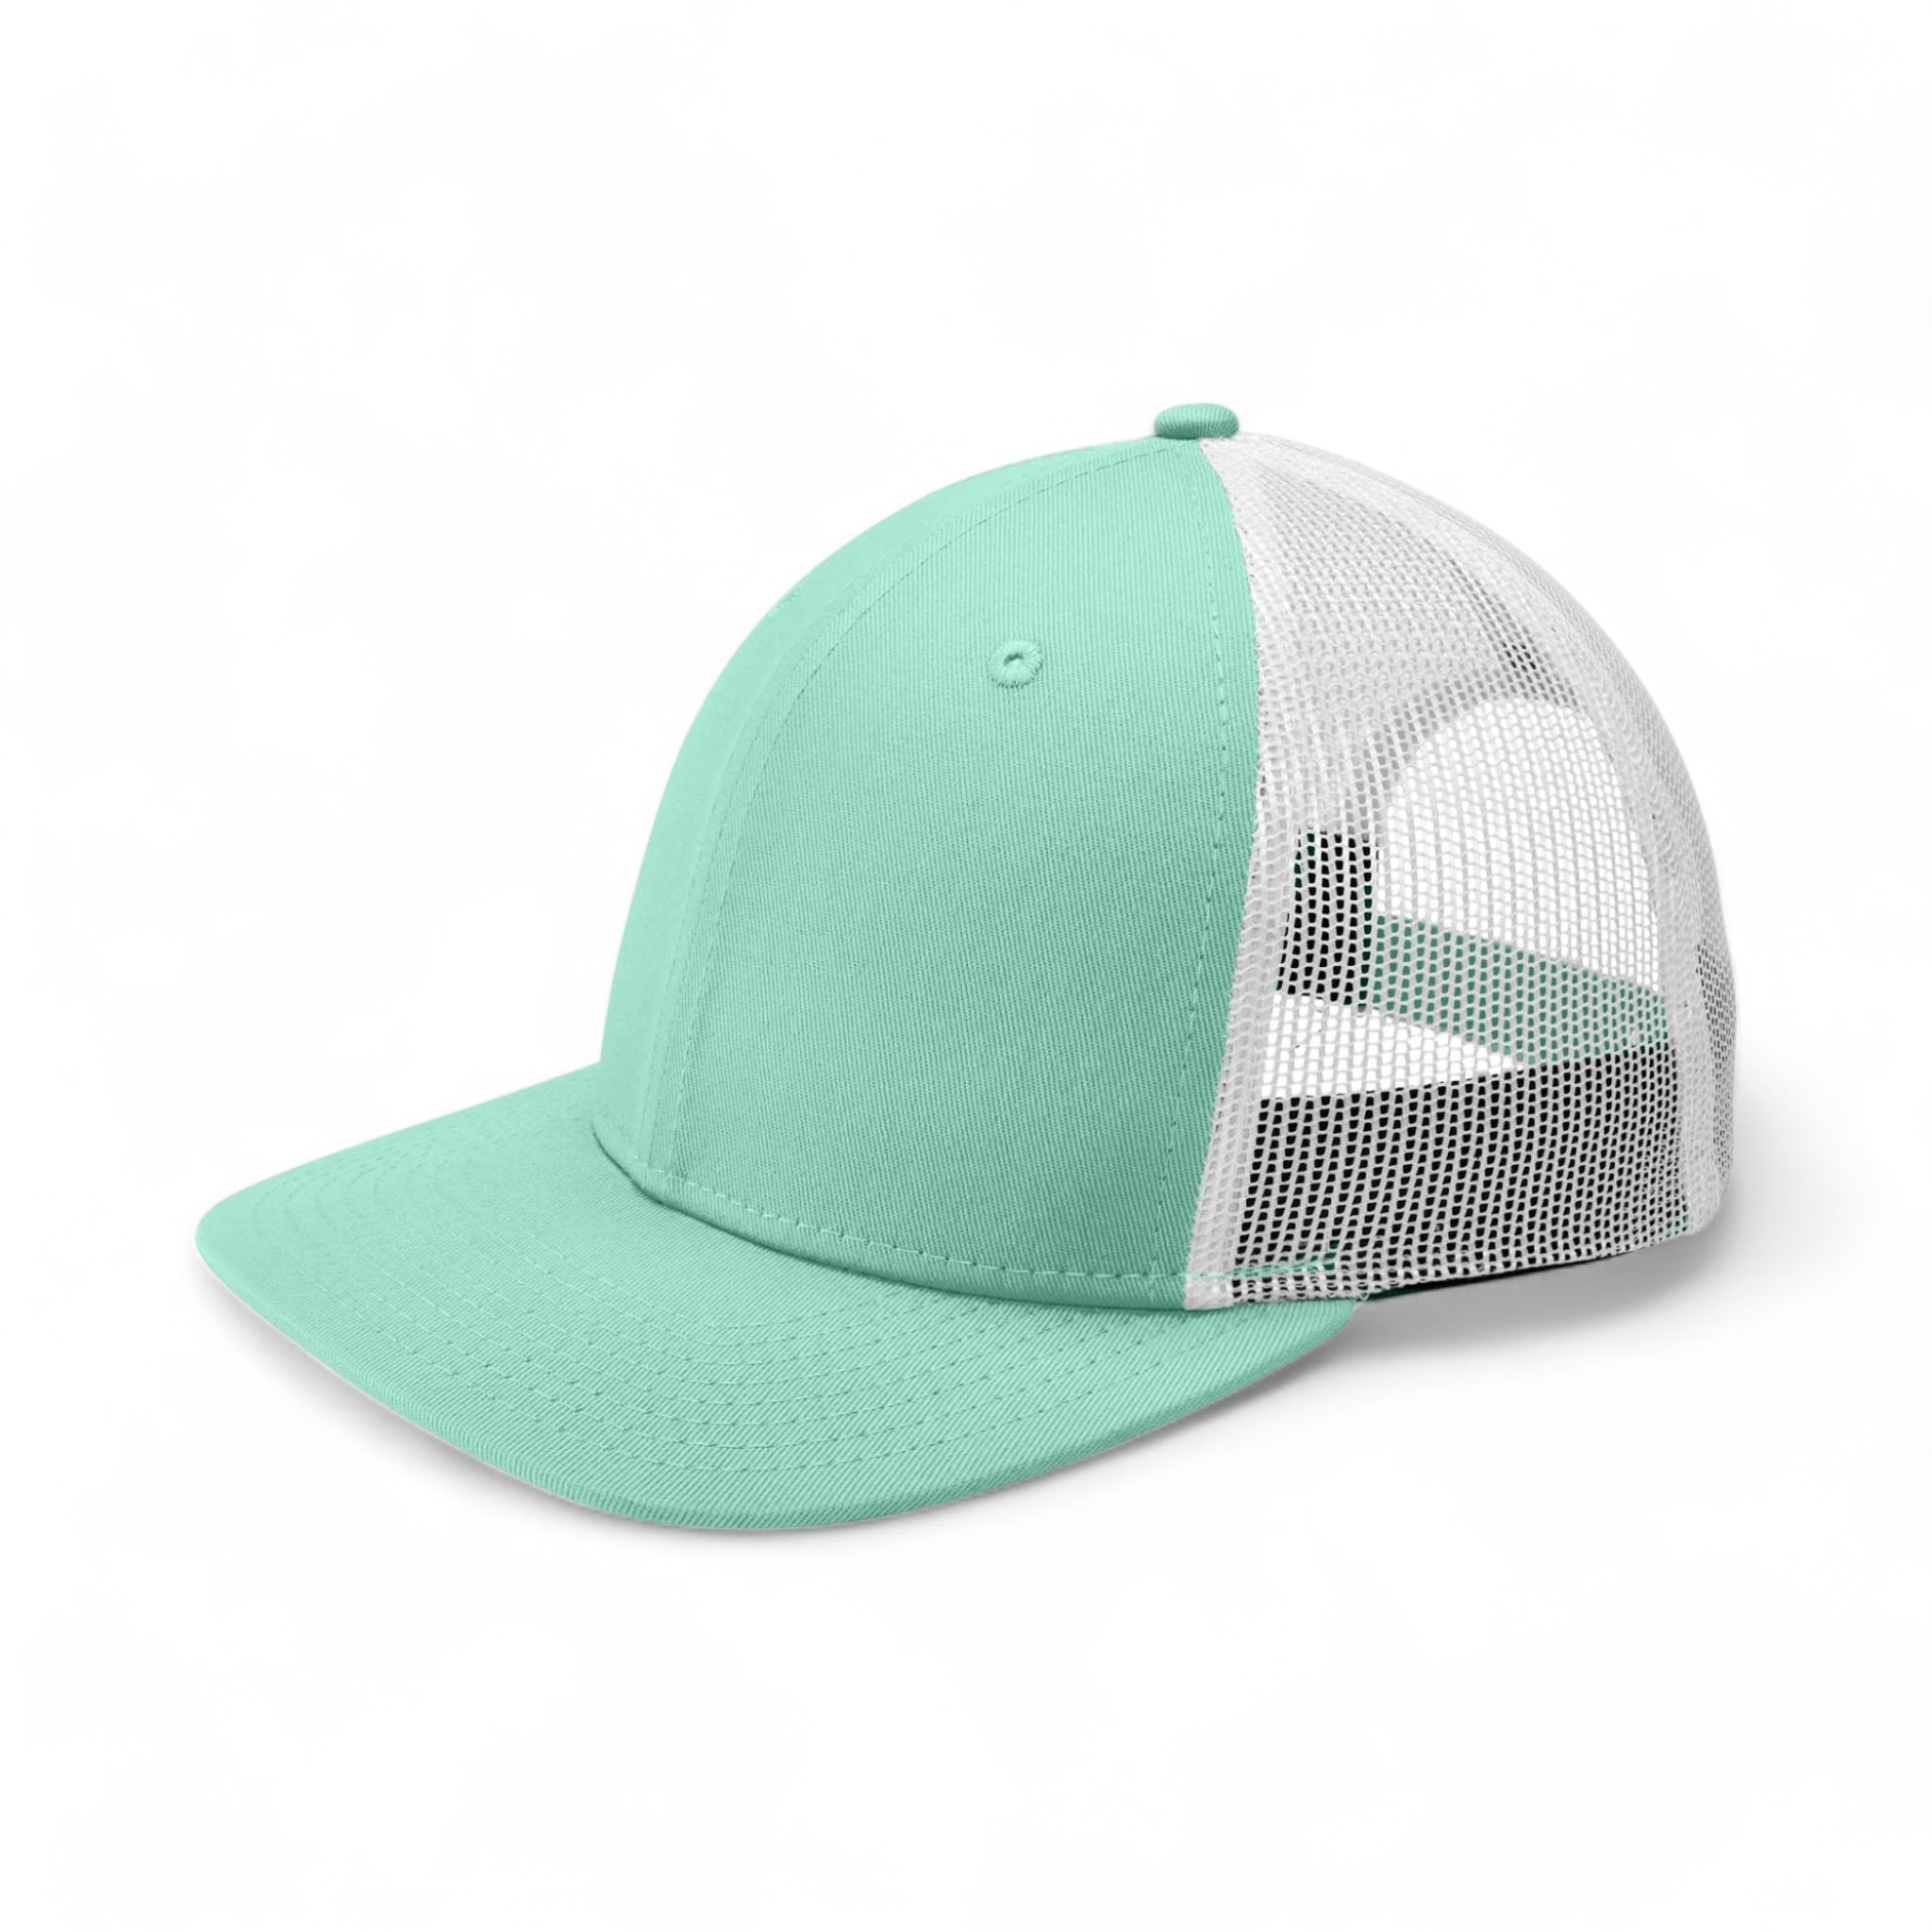 Side view of New Era NE207 custom hat in mint and white